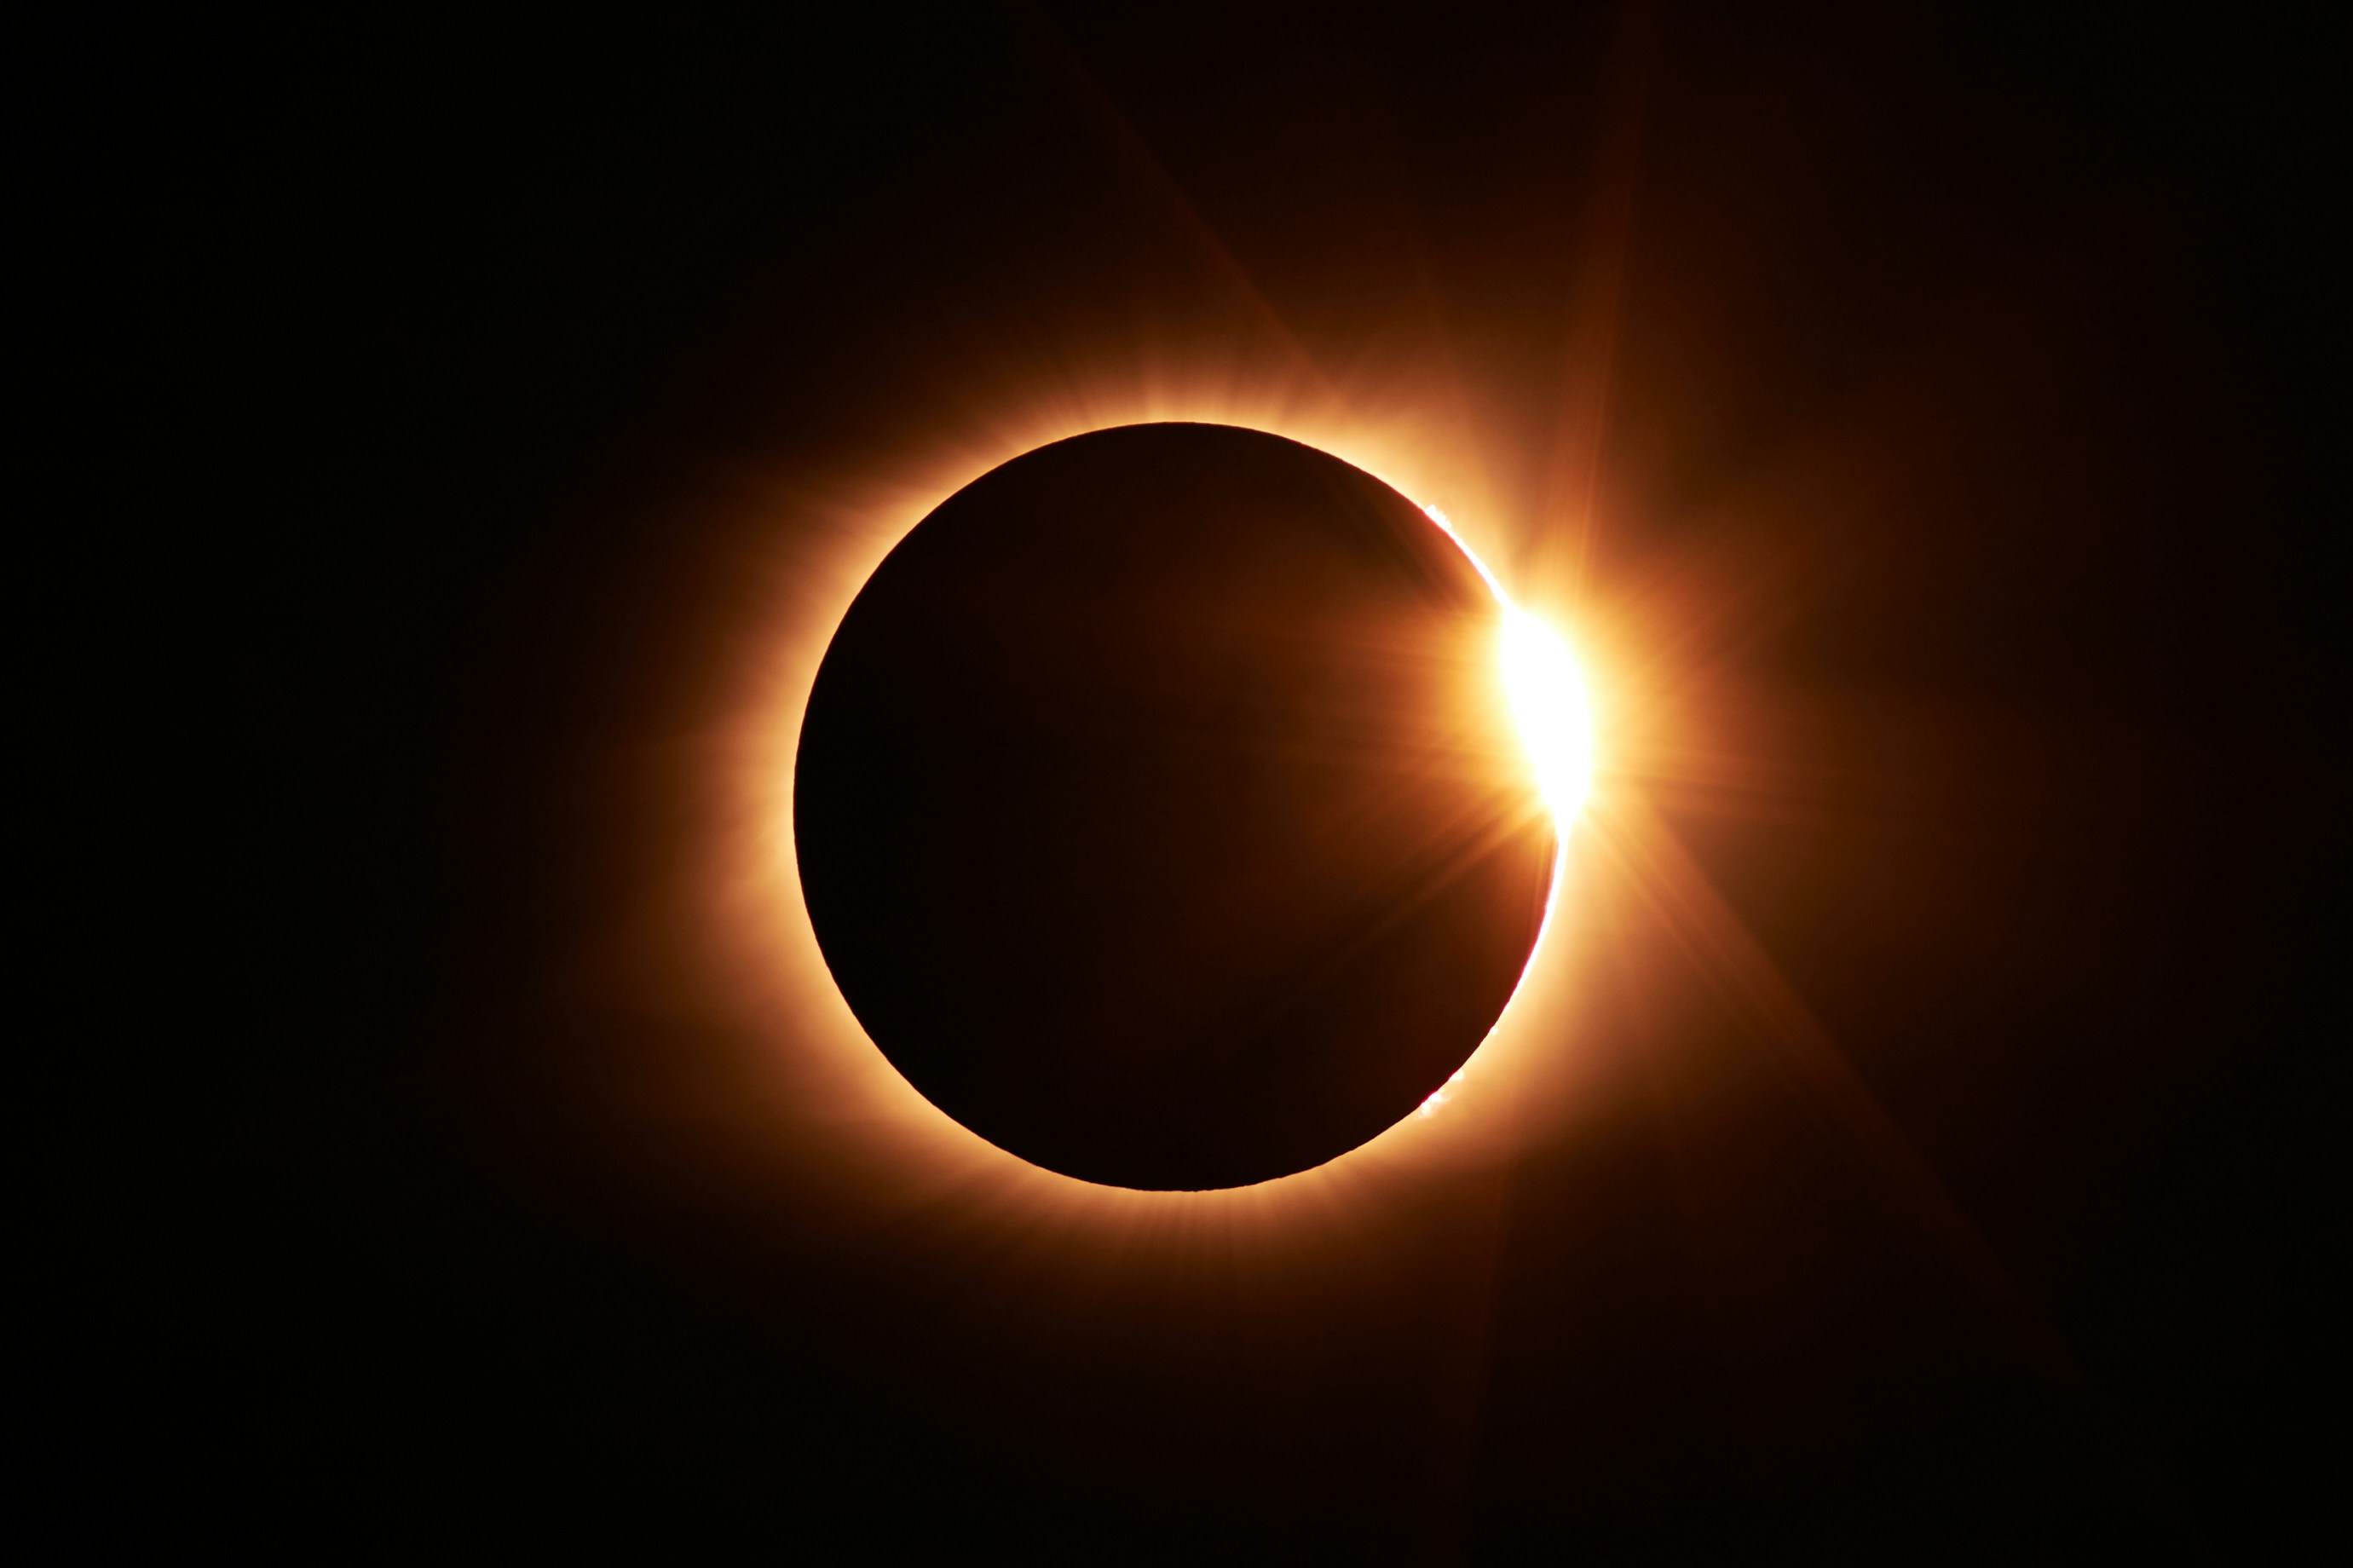 Solar eclipse image shows moon's shadow covering the sun, with bright rays emitting in a ring shape from behind the moon